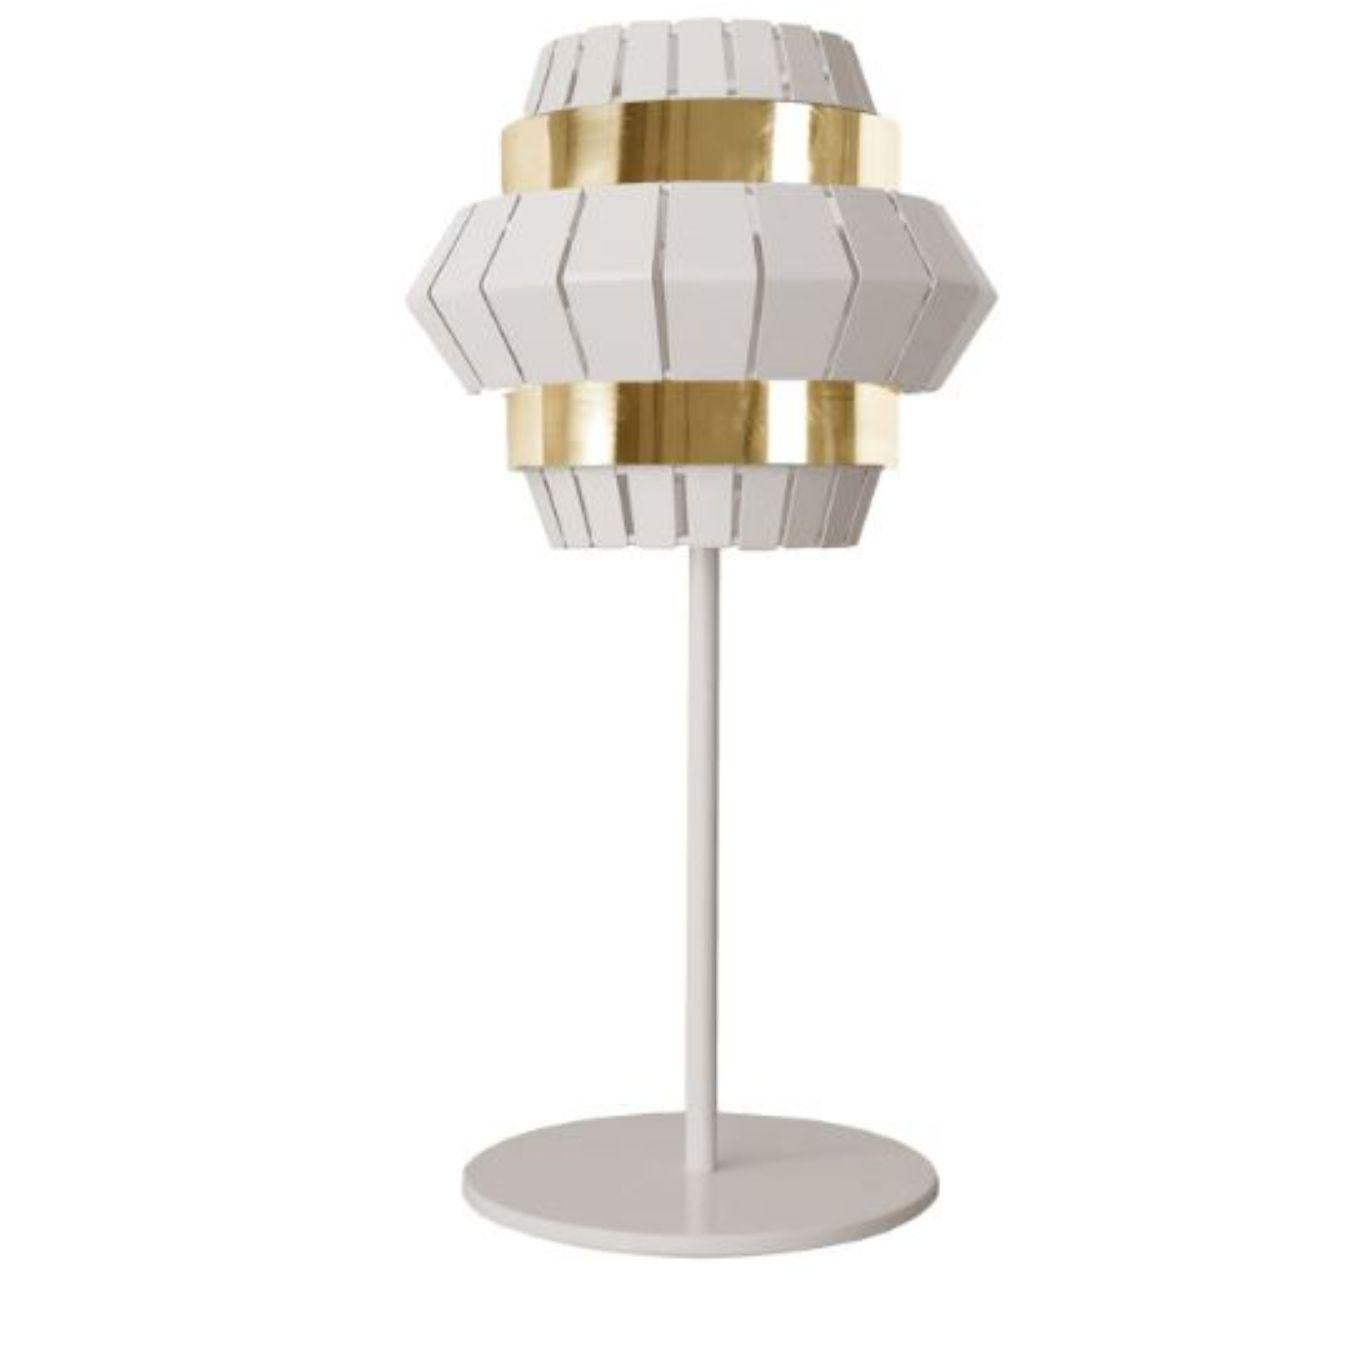 Portuguese Ivory and Lipstick Comb Table Lamp by Dooq For Sale